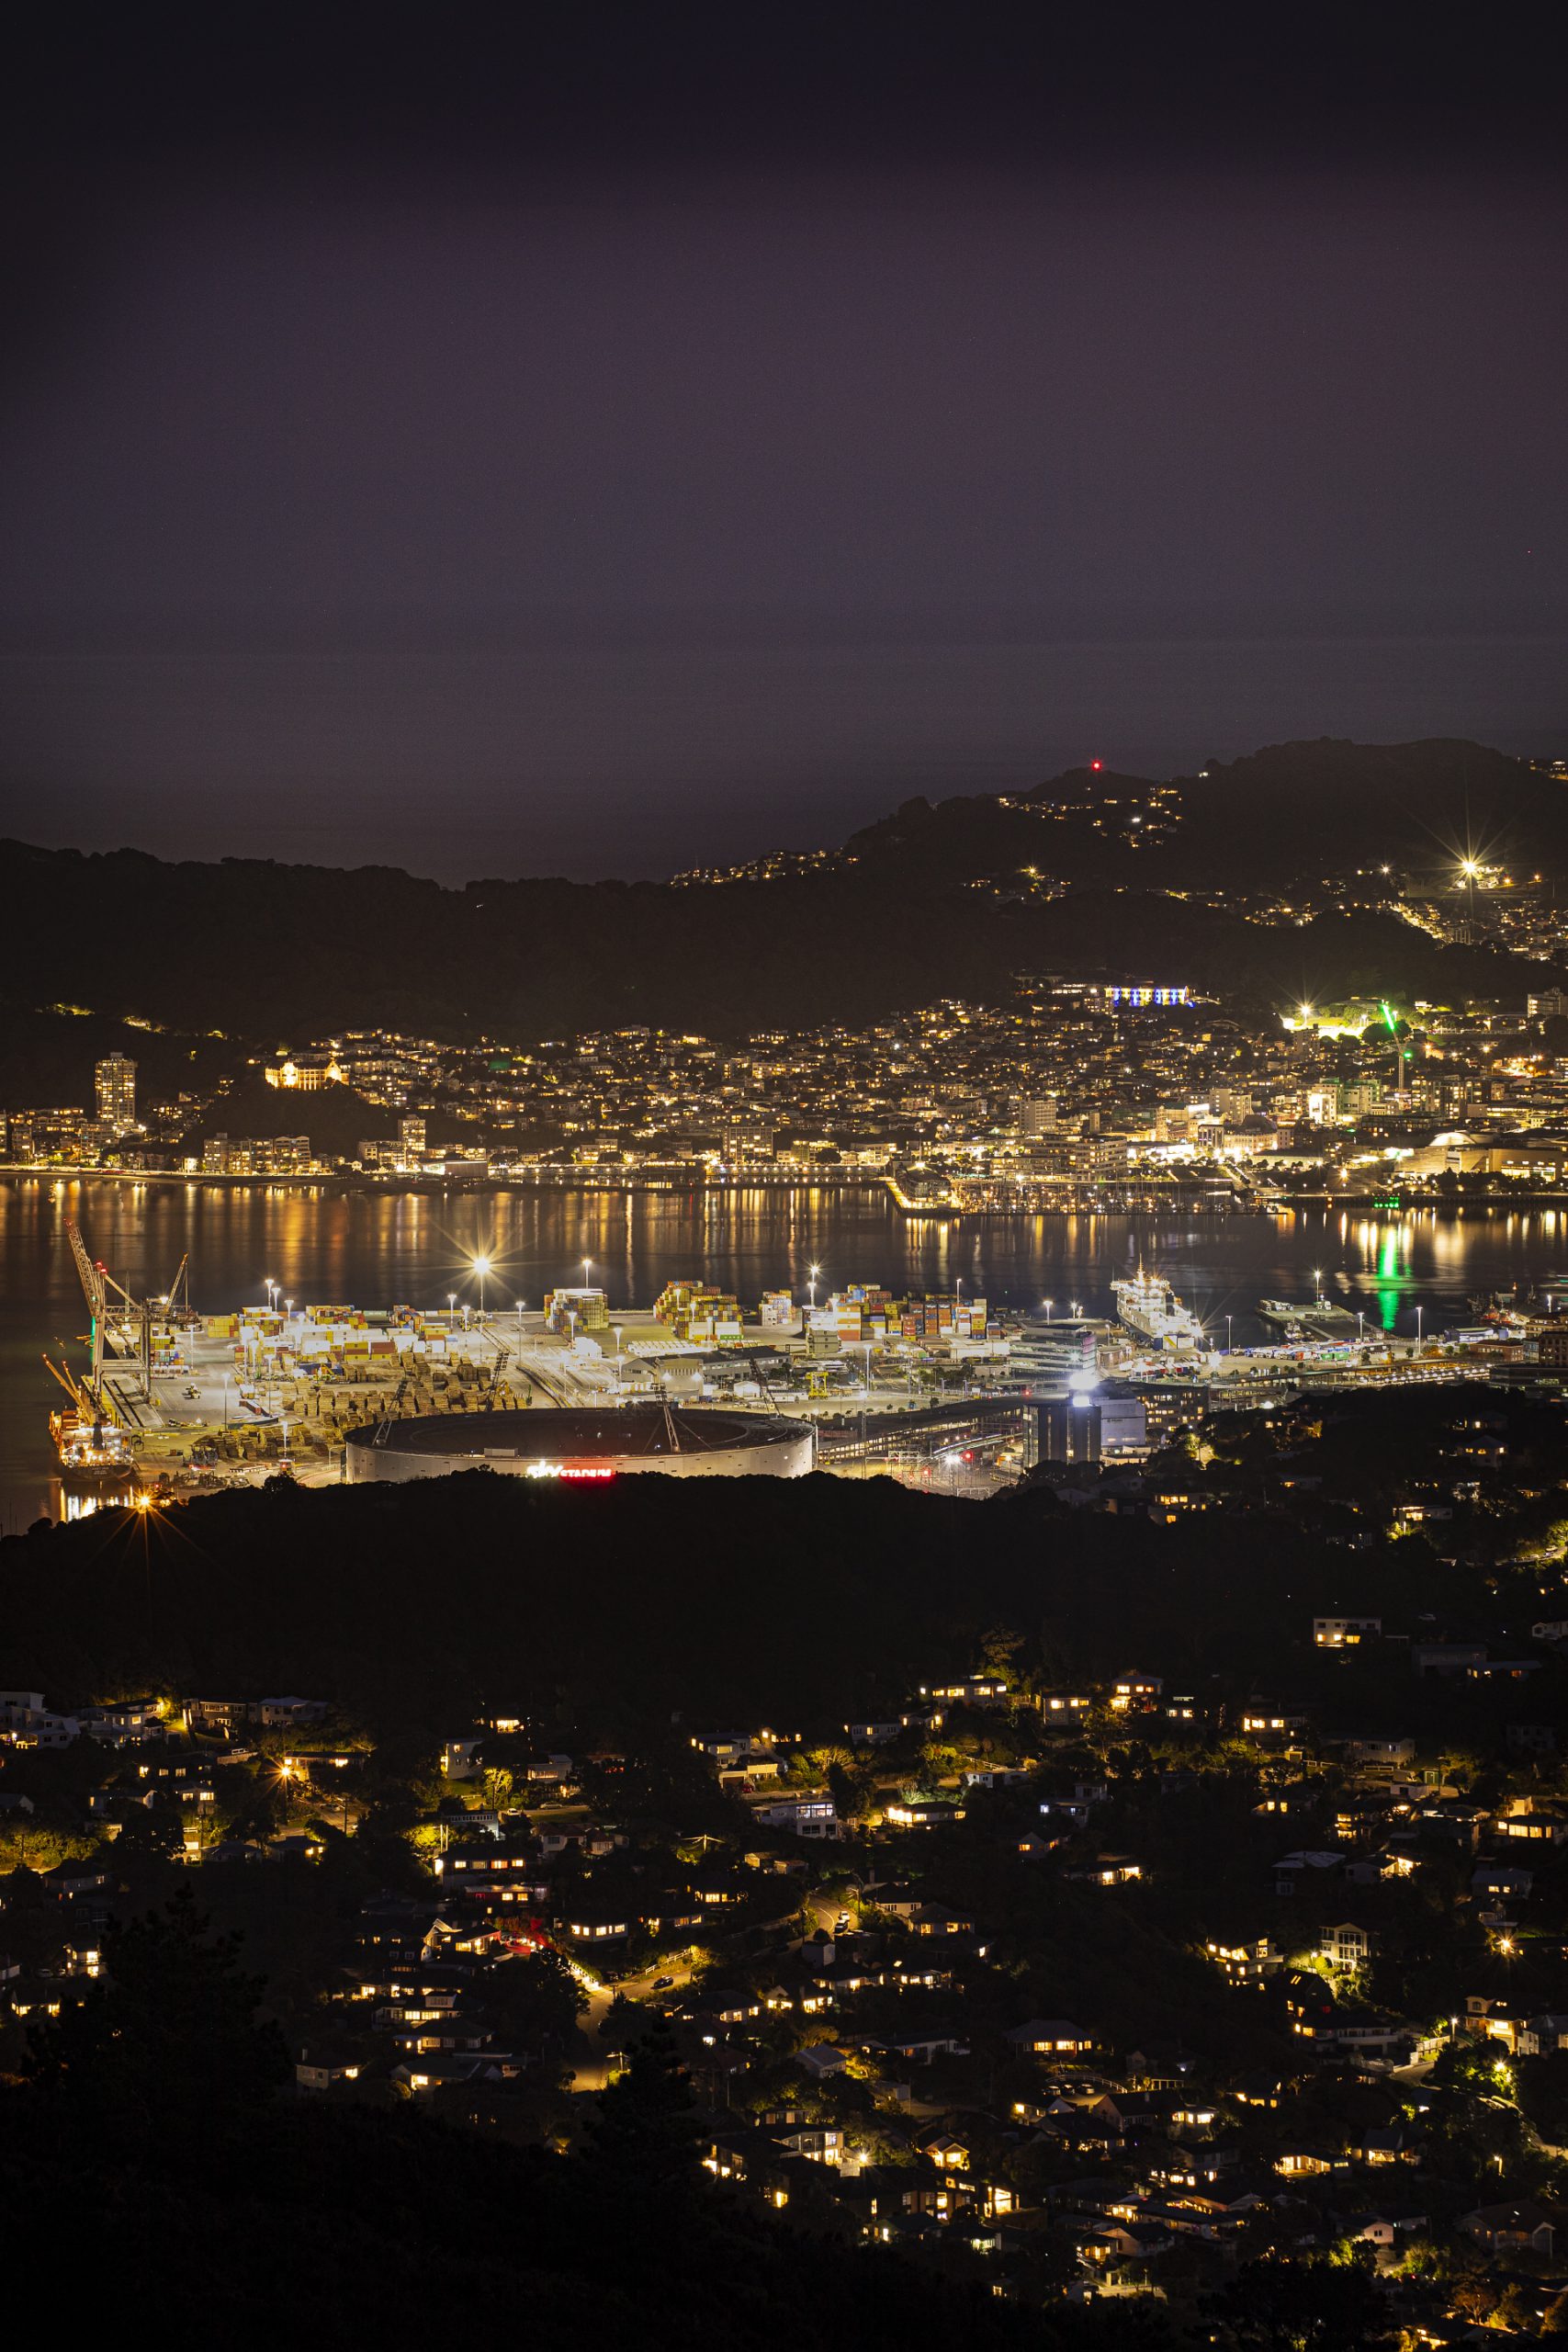 On the summit of Kaukau and the view of Wellington City at night